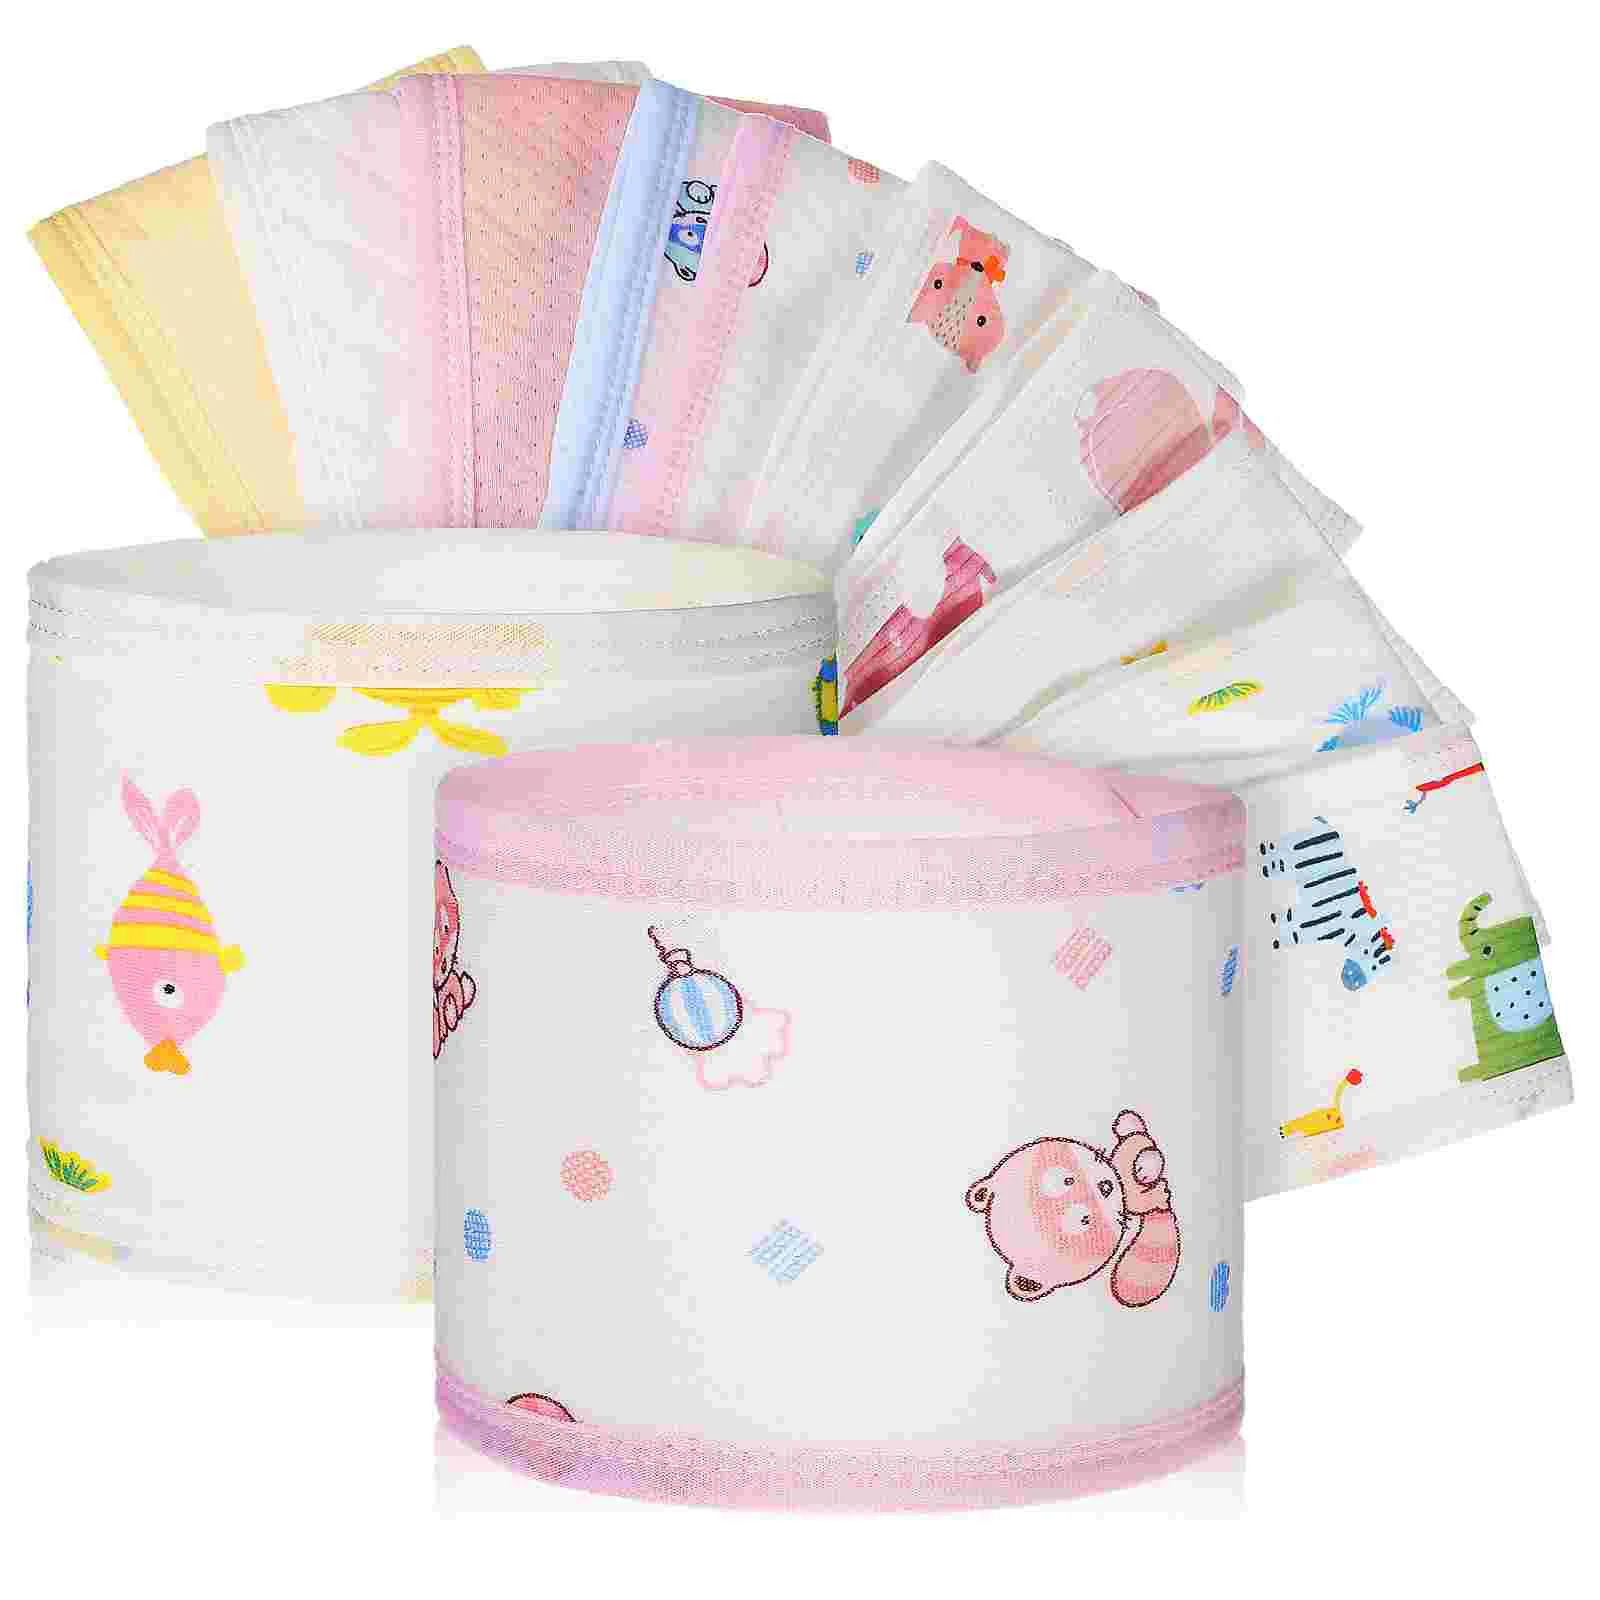 

10 Pcs Infant Belly Wraps Baby Umbilical Cord European American Cotton Band Newborn Bands